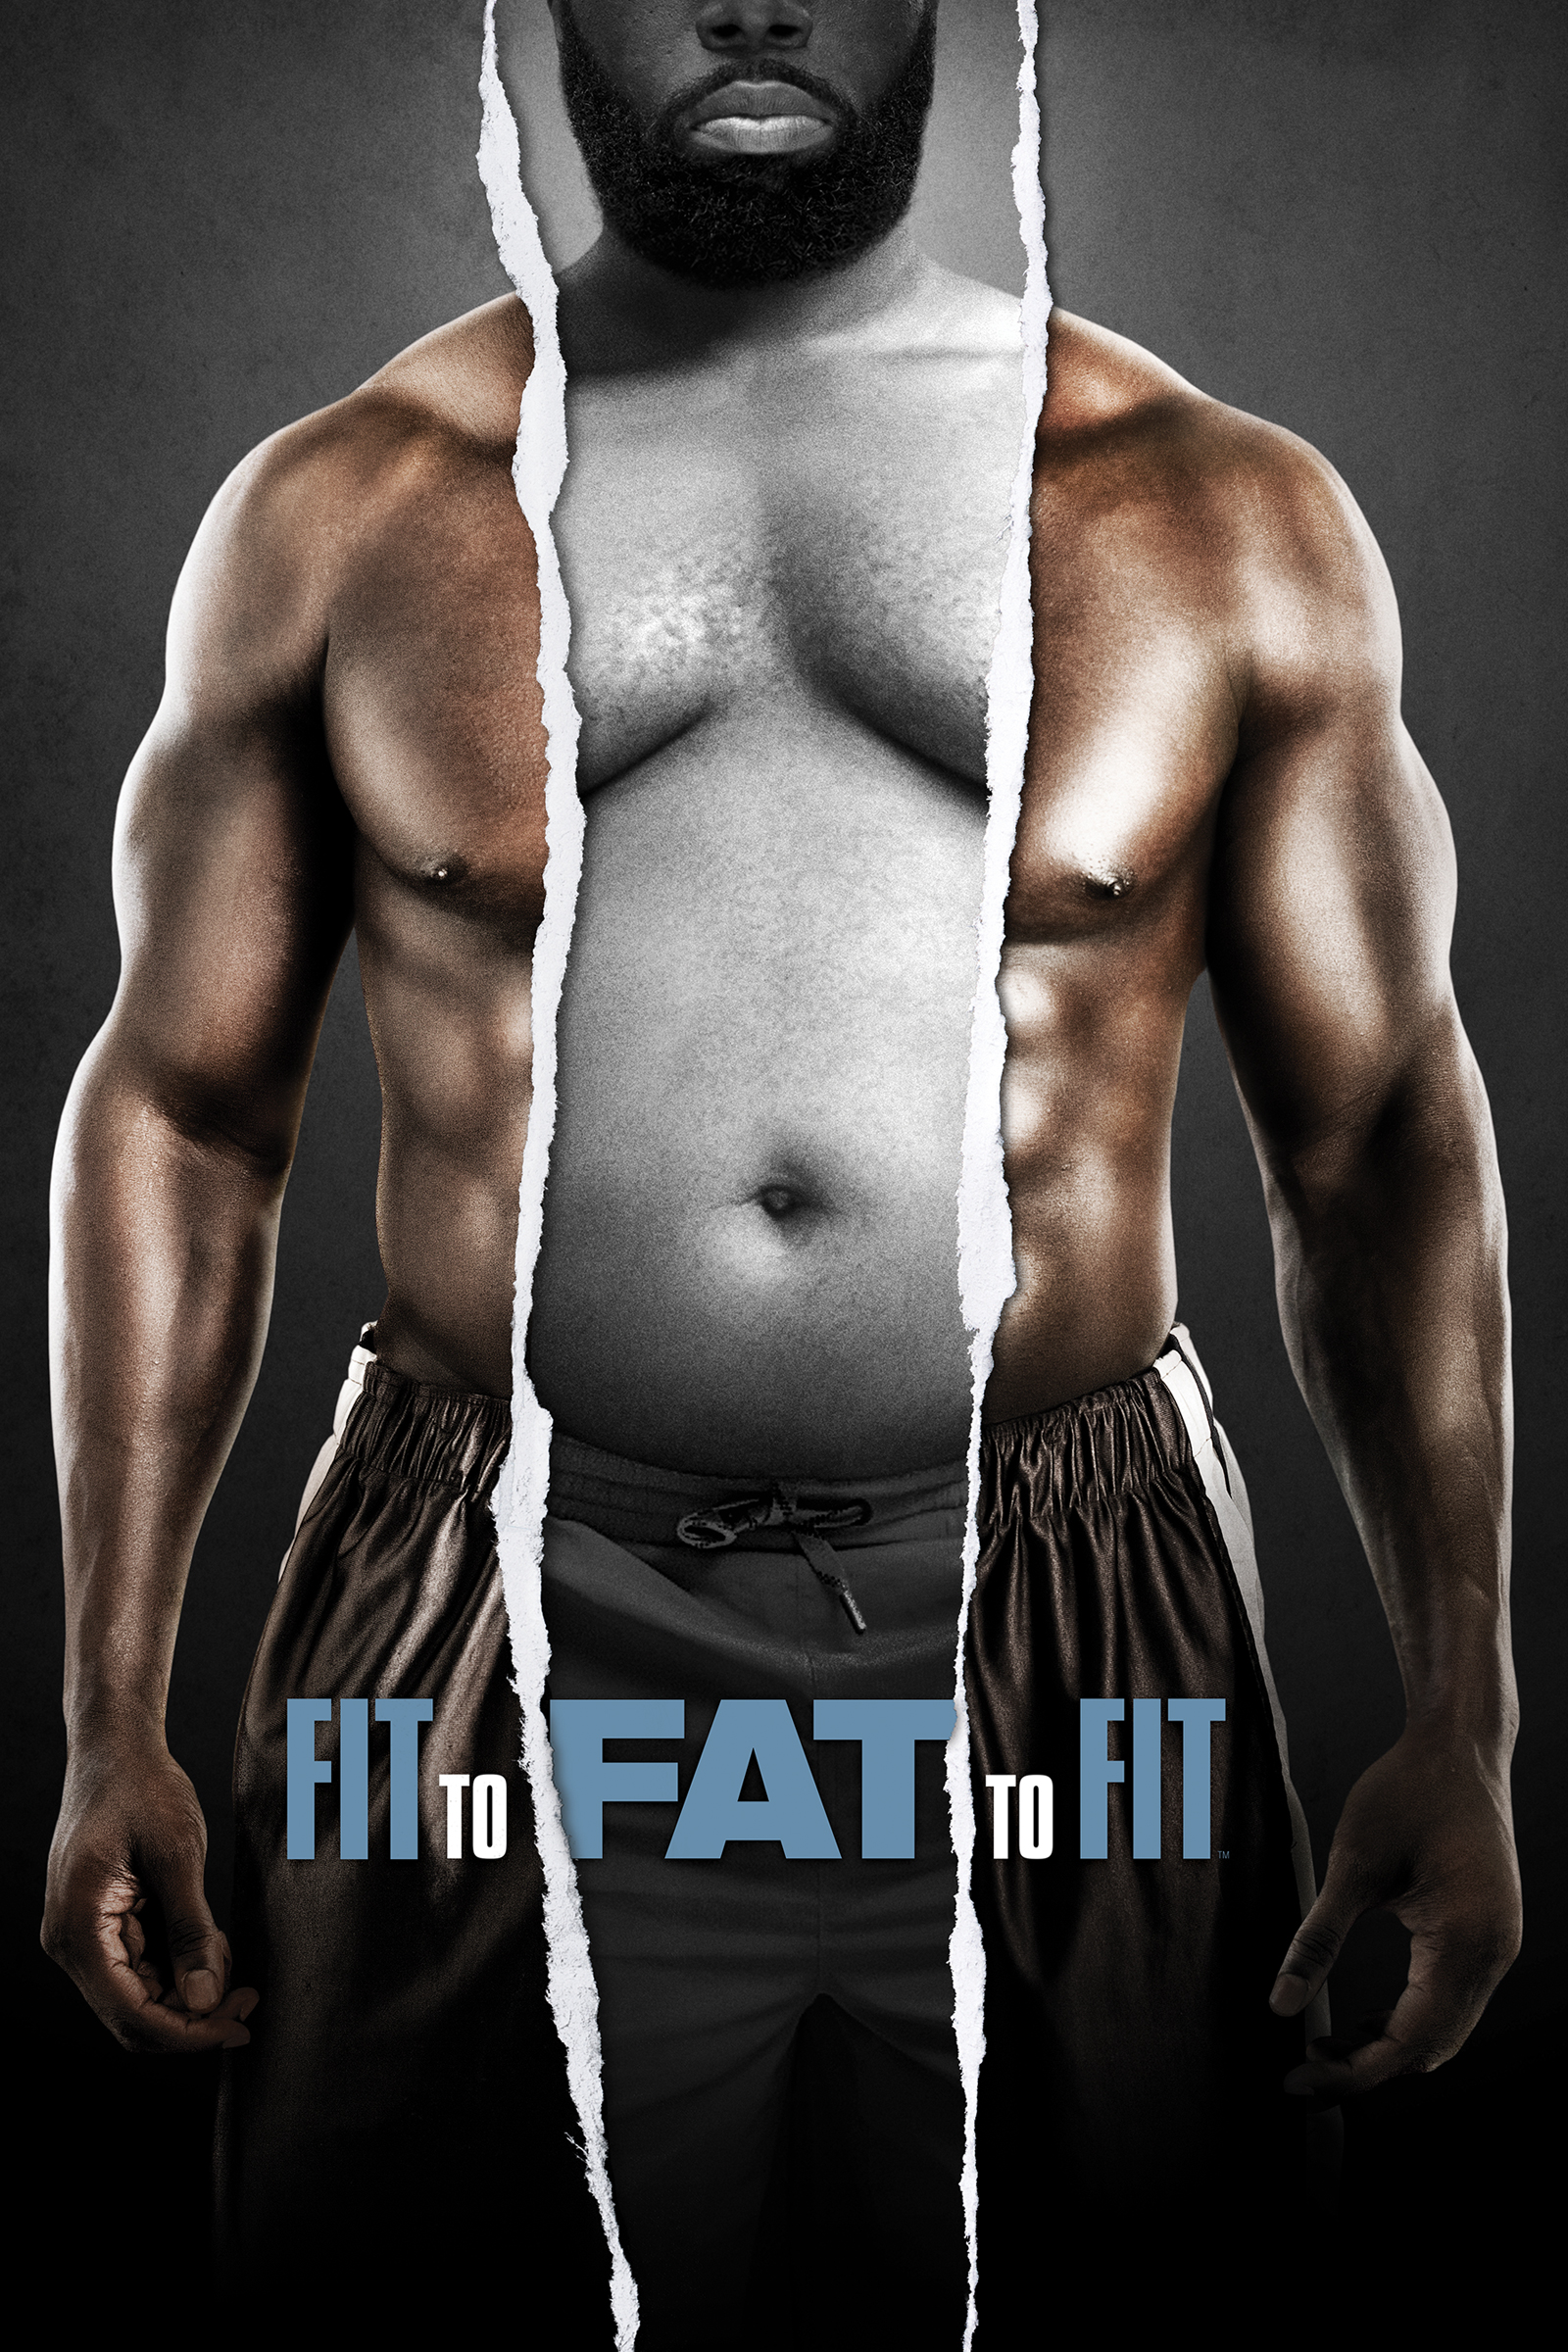 Watch Fit to Fat to Fit Online, Season 1 (2016)